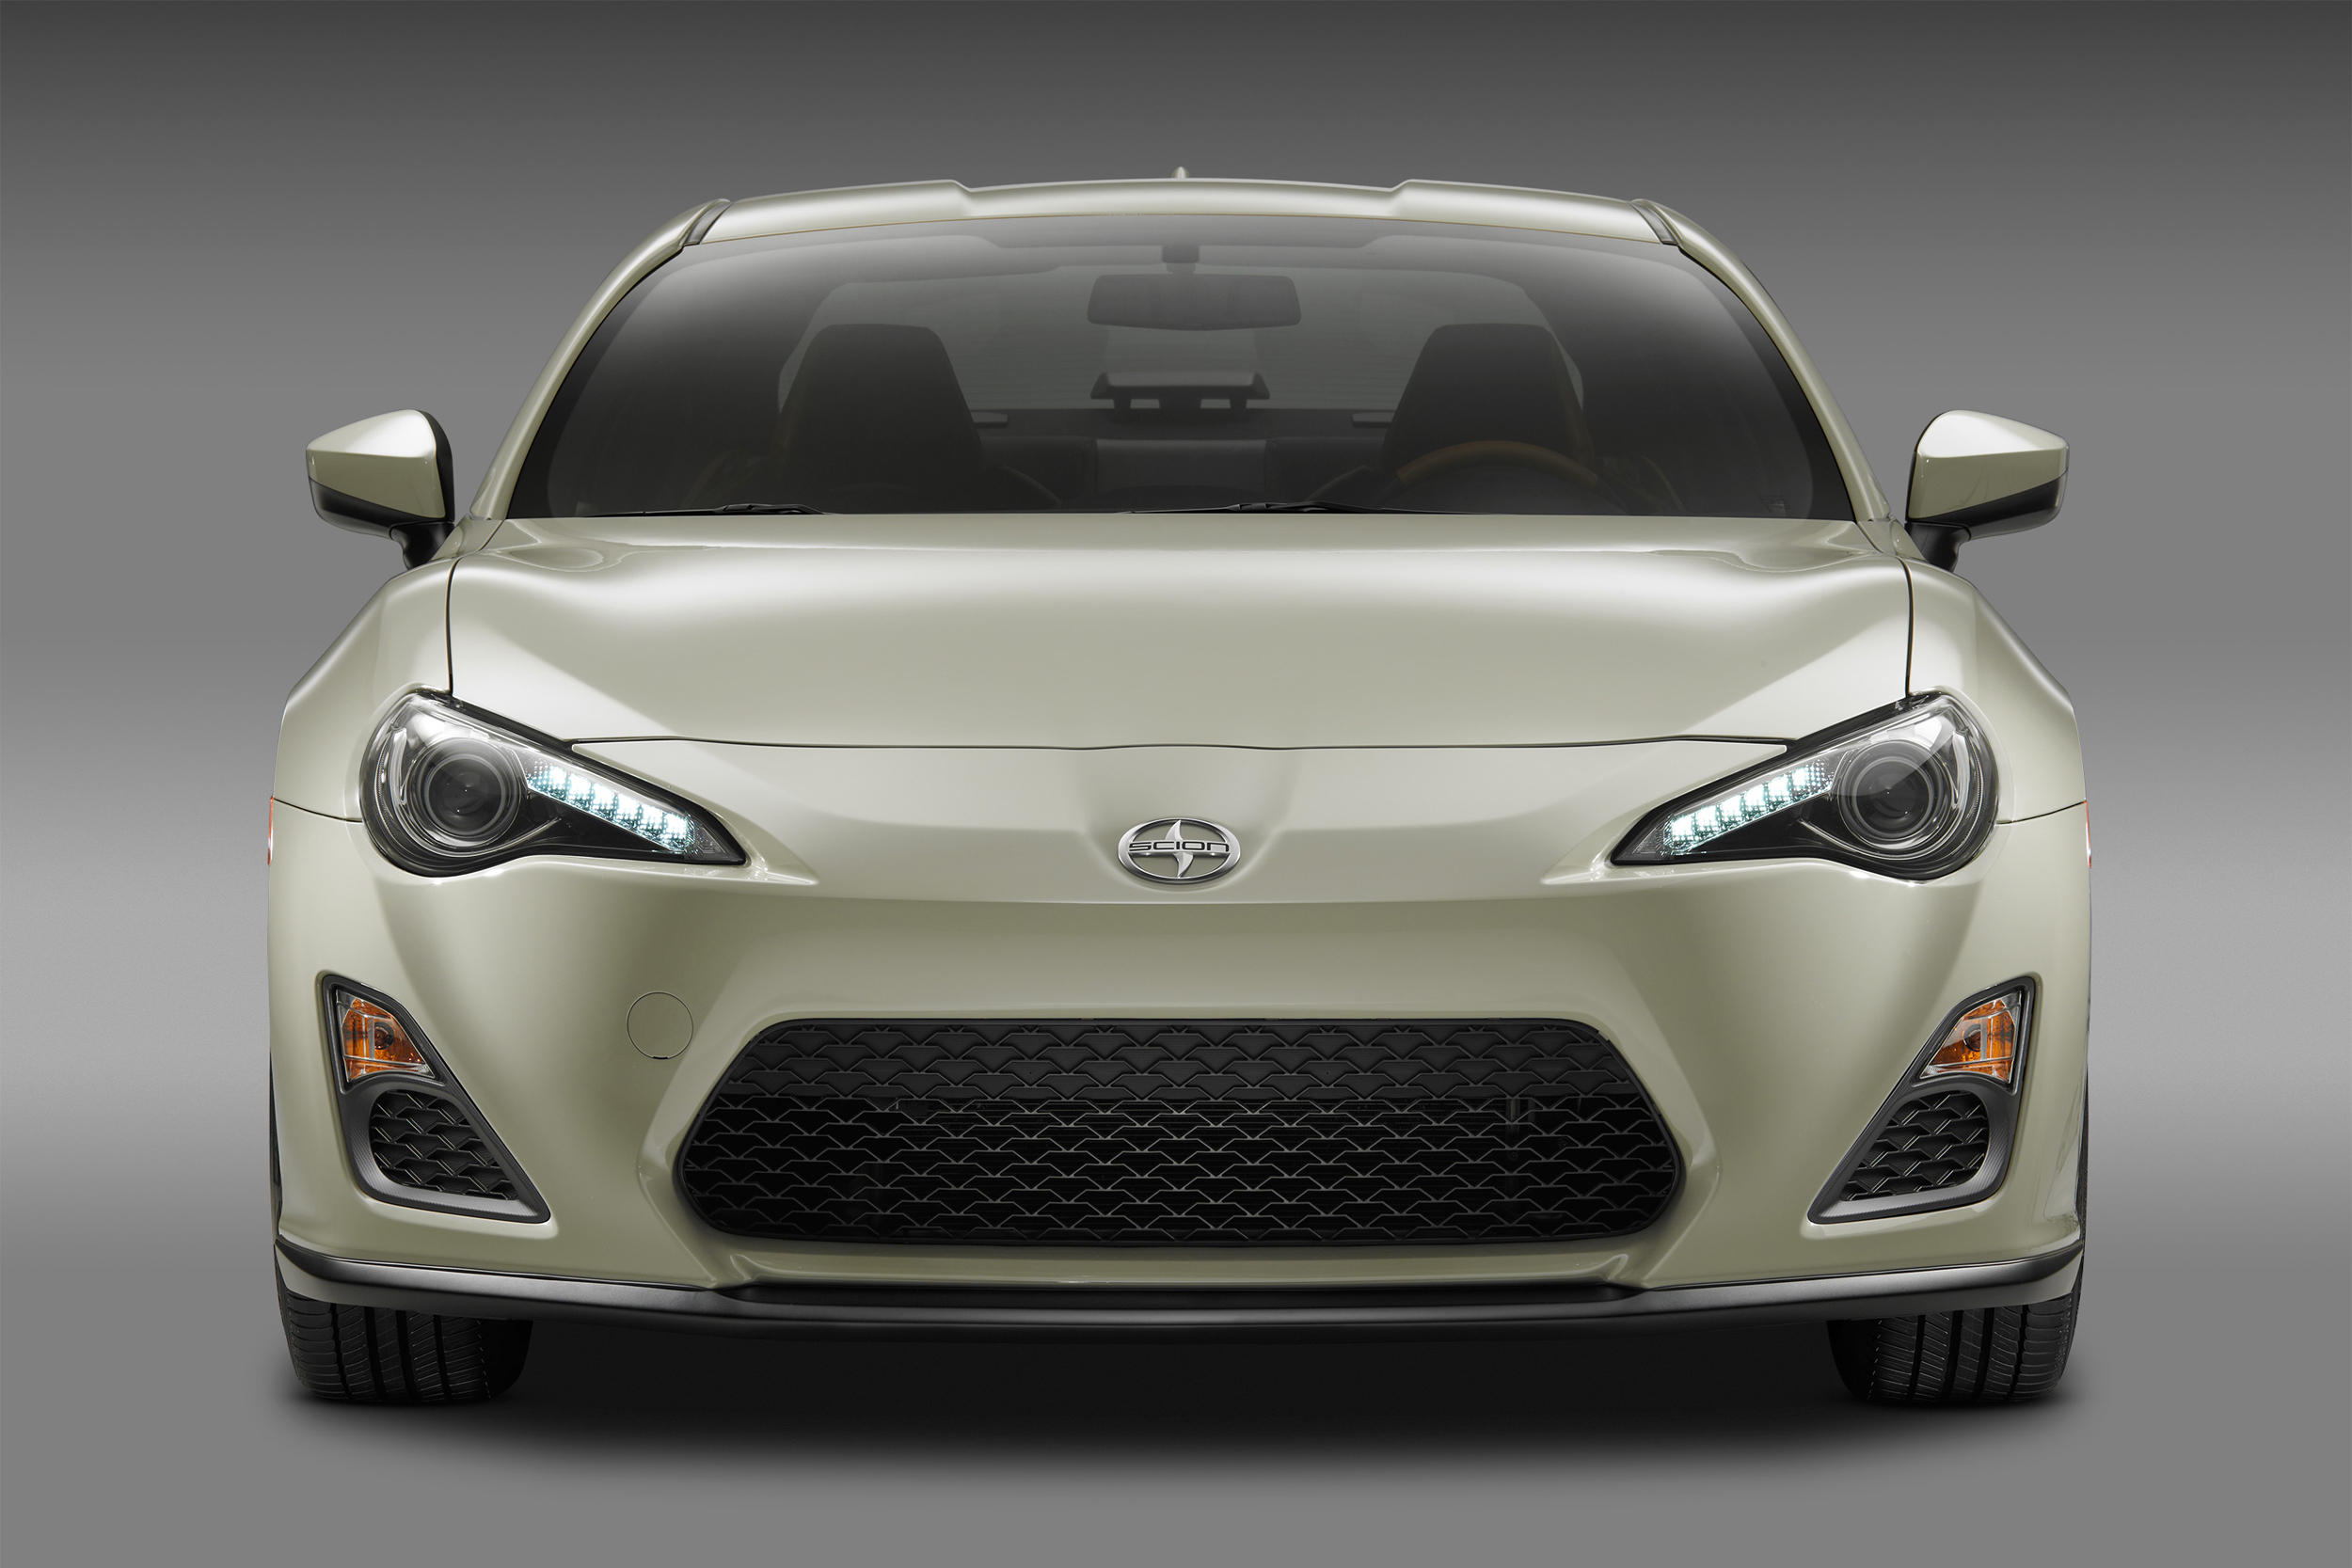 Scion FR S Release Series 2.0 MT 2016 - International Price & Overview